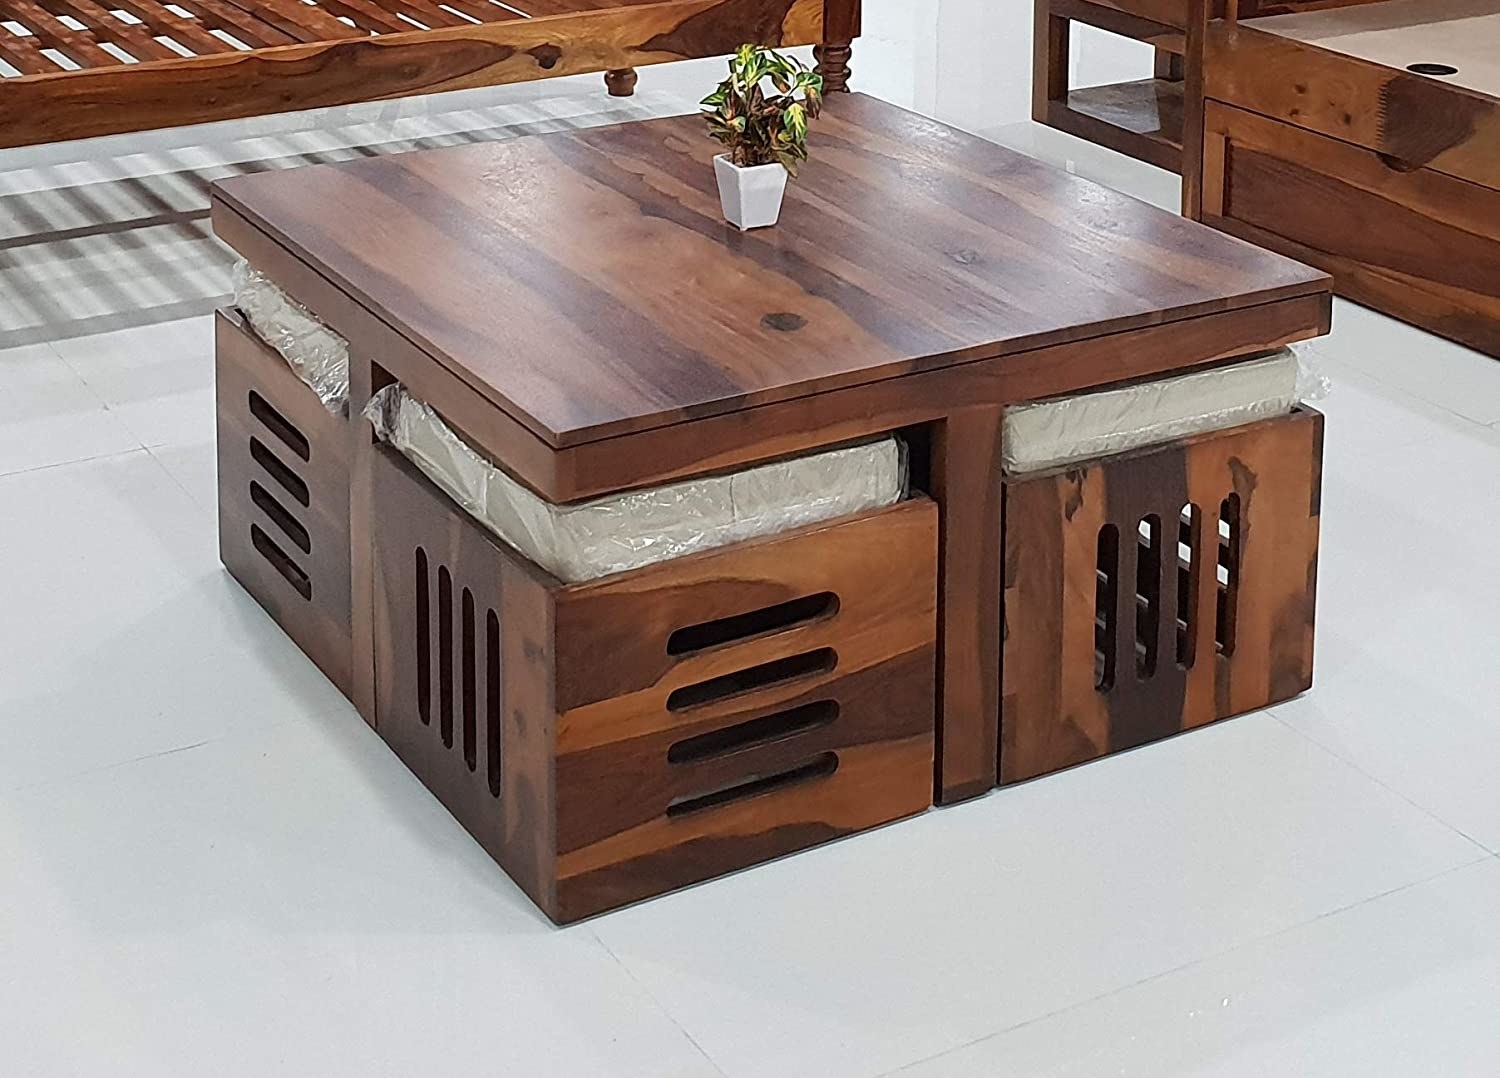 A wooden coffee table with stools underneath it 